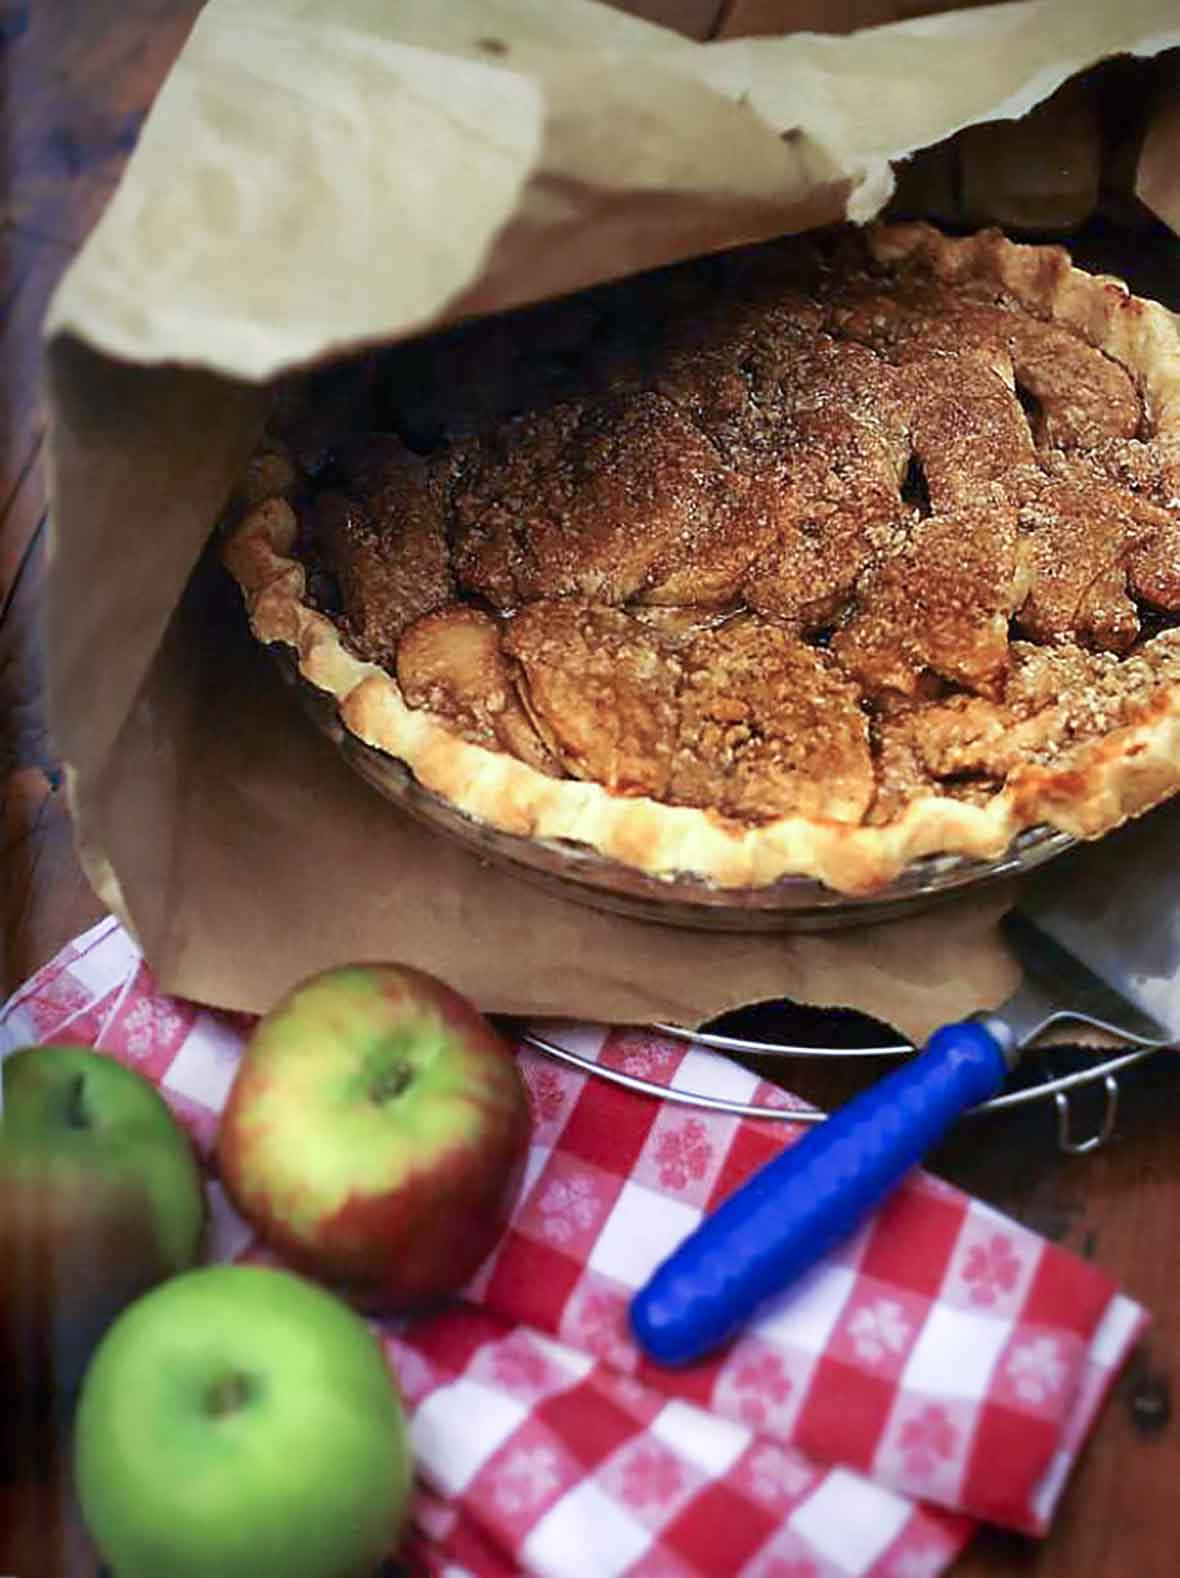 A cooked brown-bag apple pie inside a torn paper bag